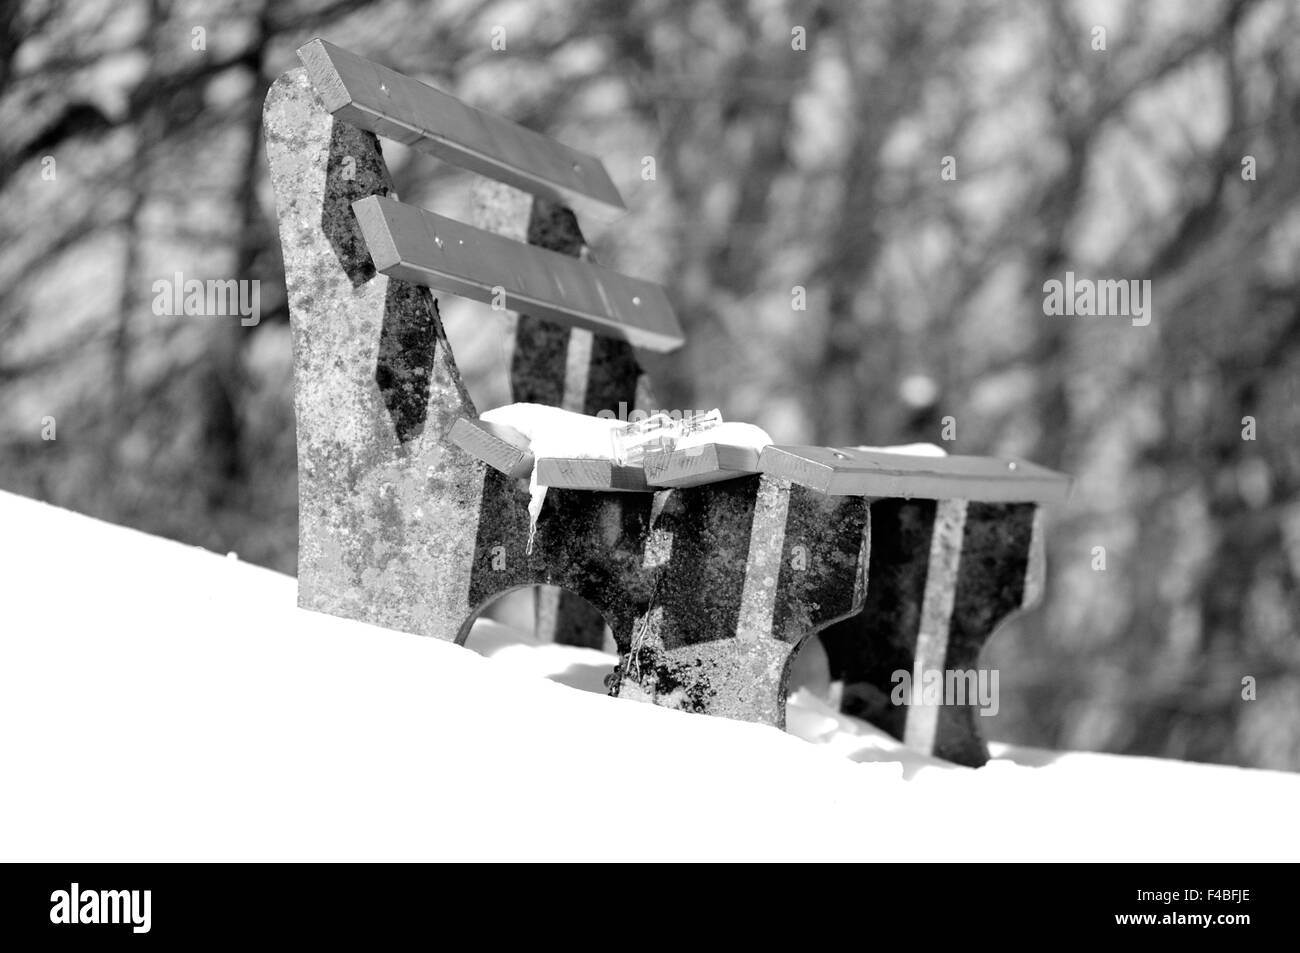 Park bench with bottle black and white Stock Photo